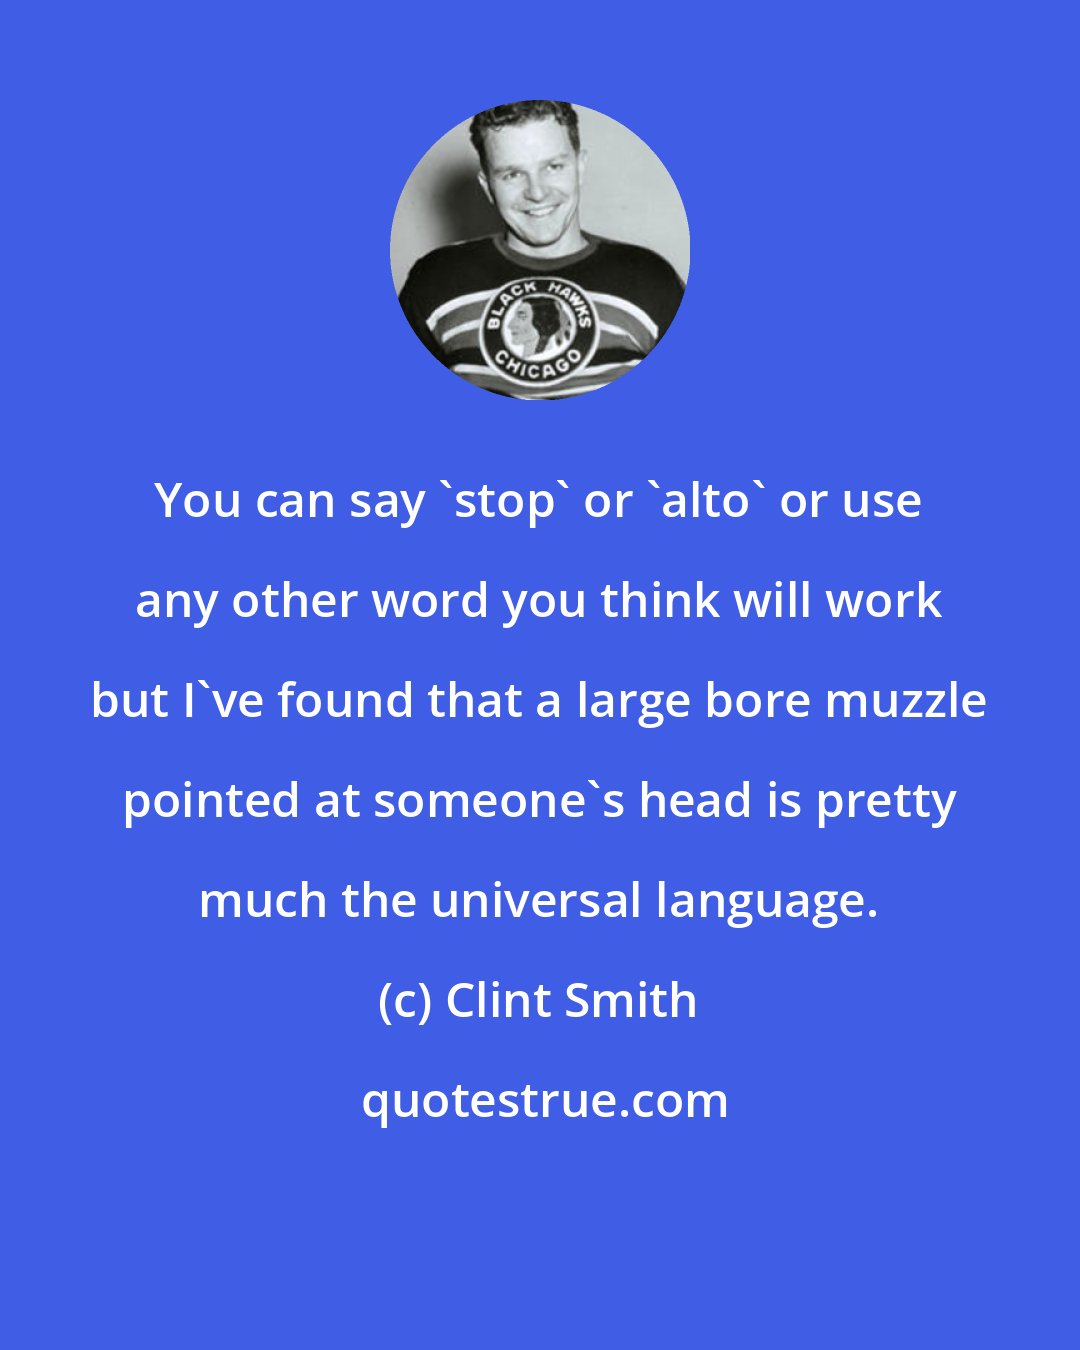 Clint Smith: You can say 'stop' or 'alto' or use any other word you think will work but I've found that a large bore muzzle pointed at someone's head is pretty much the universal language.